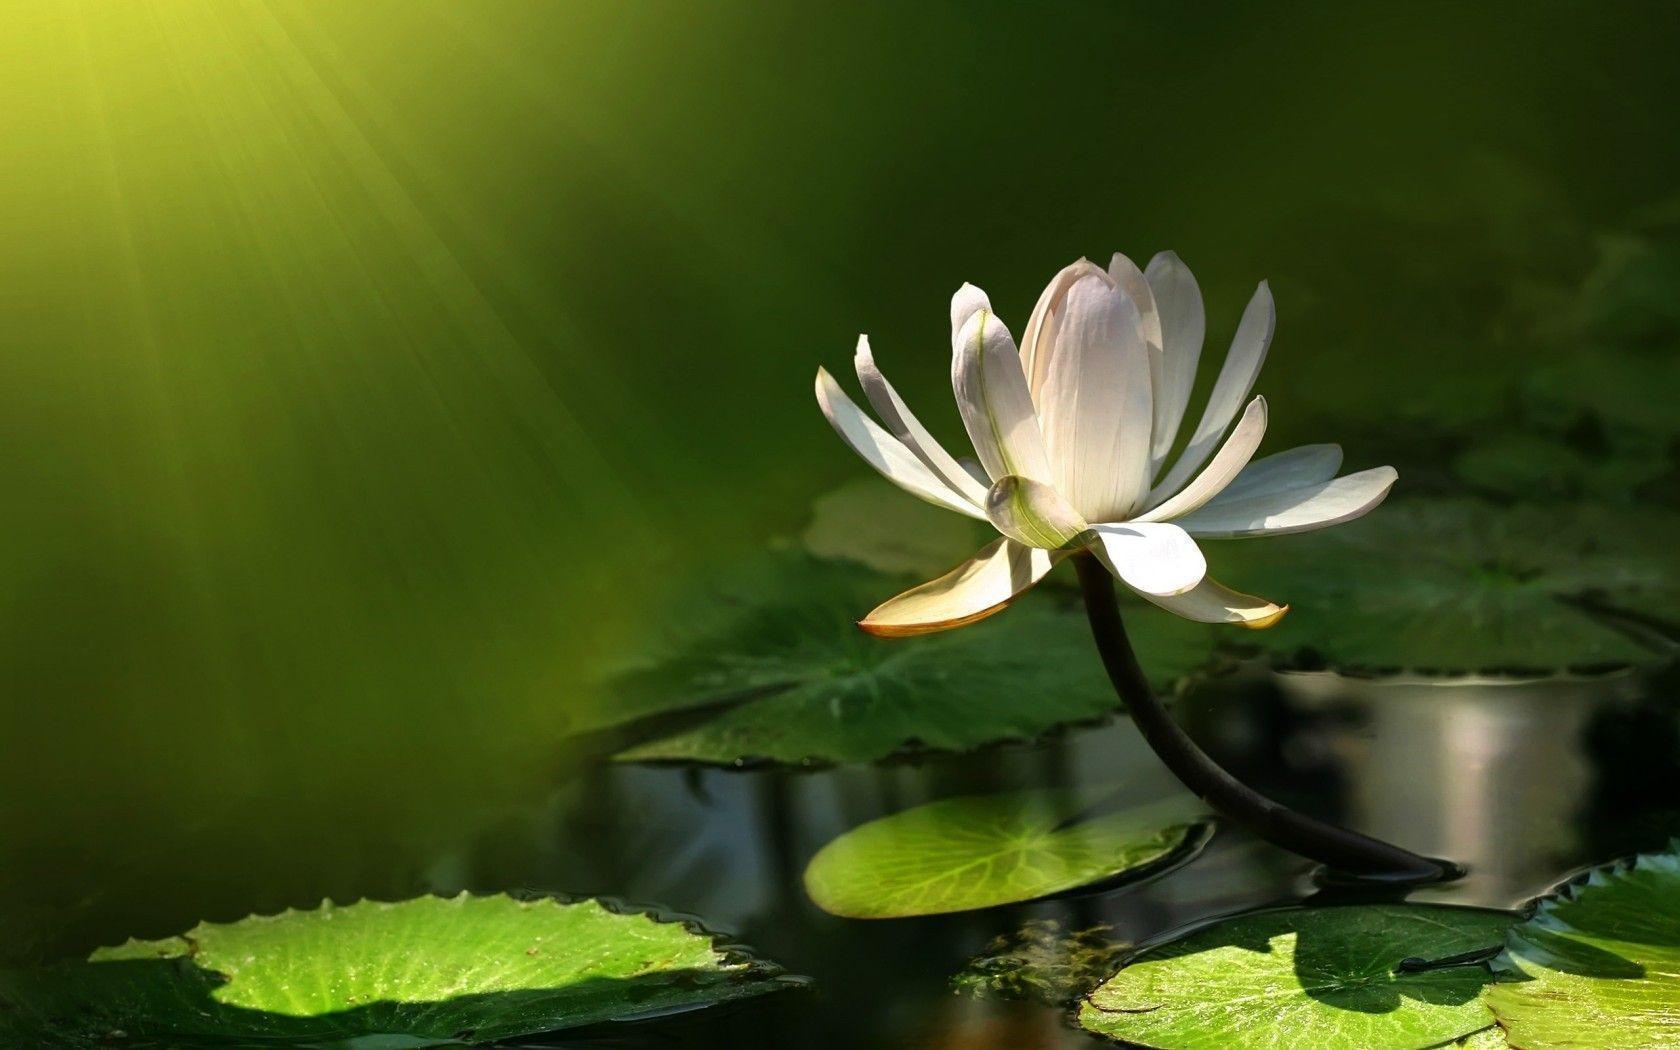 White Water Lily widescreen wallpaper. Wide